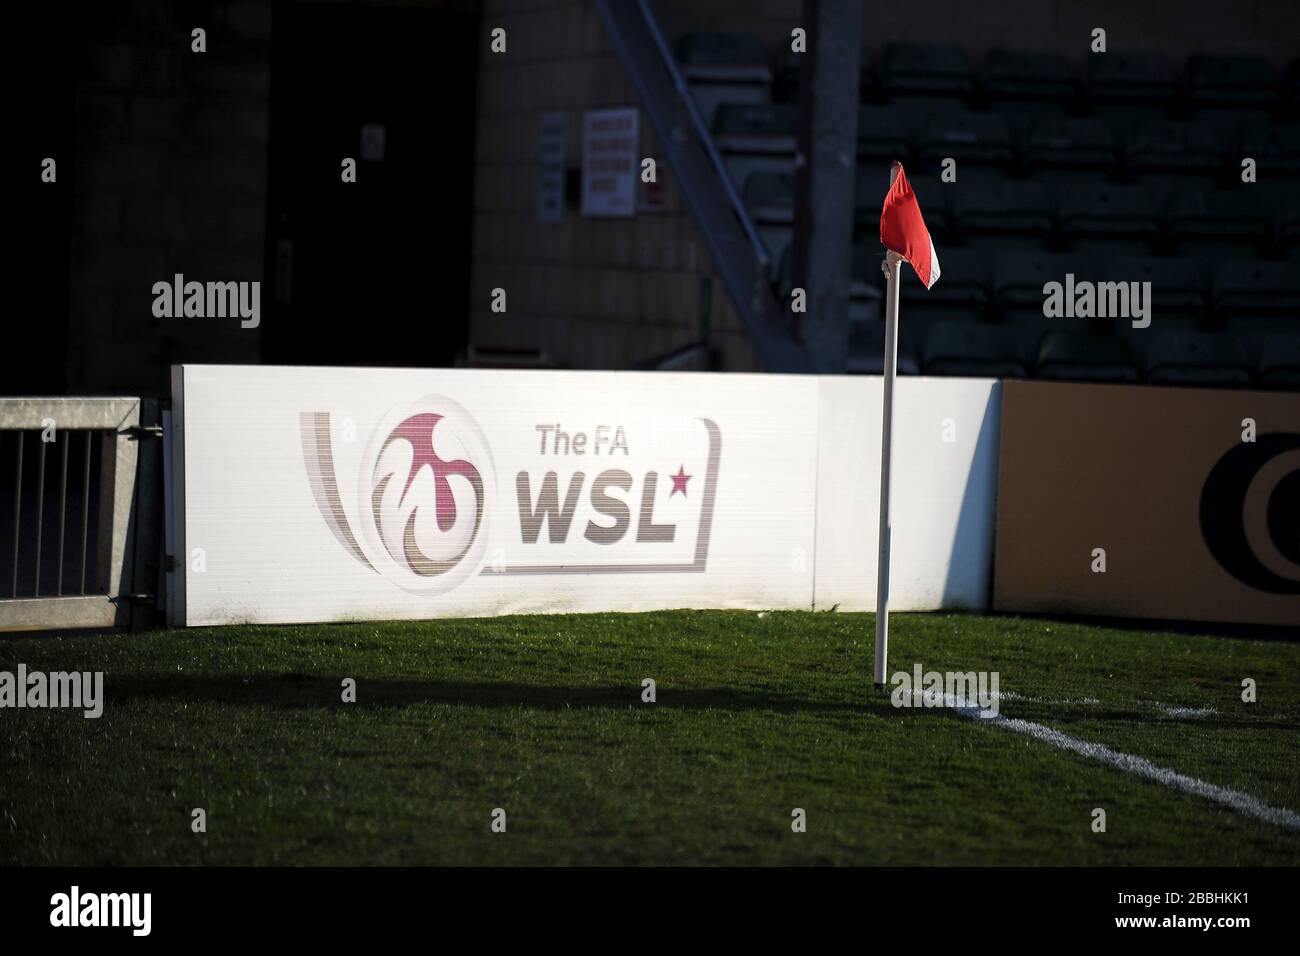 Detail of a corner flag and board reading The FA WSA. Stock Photo